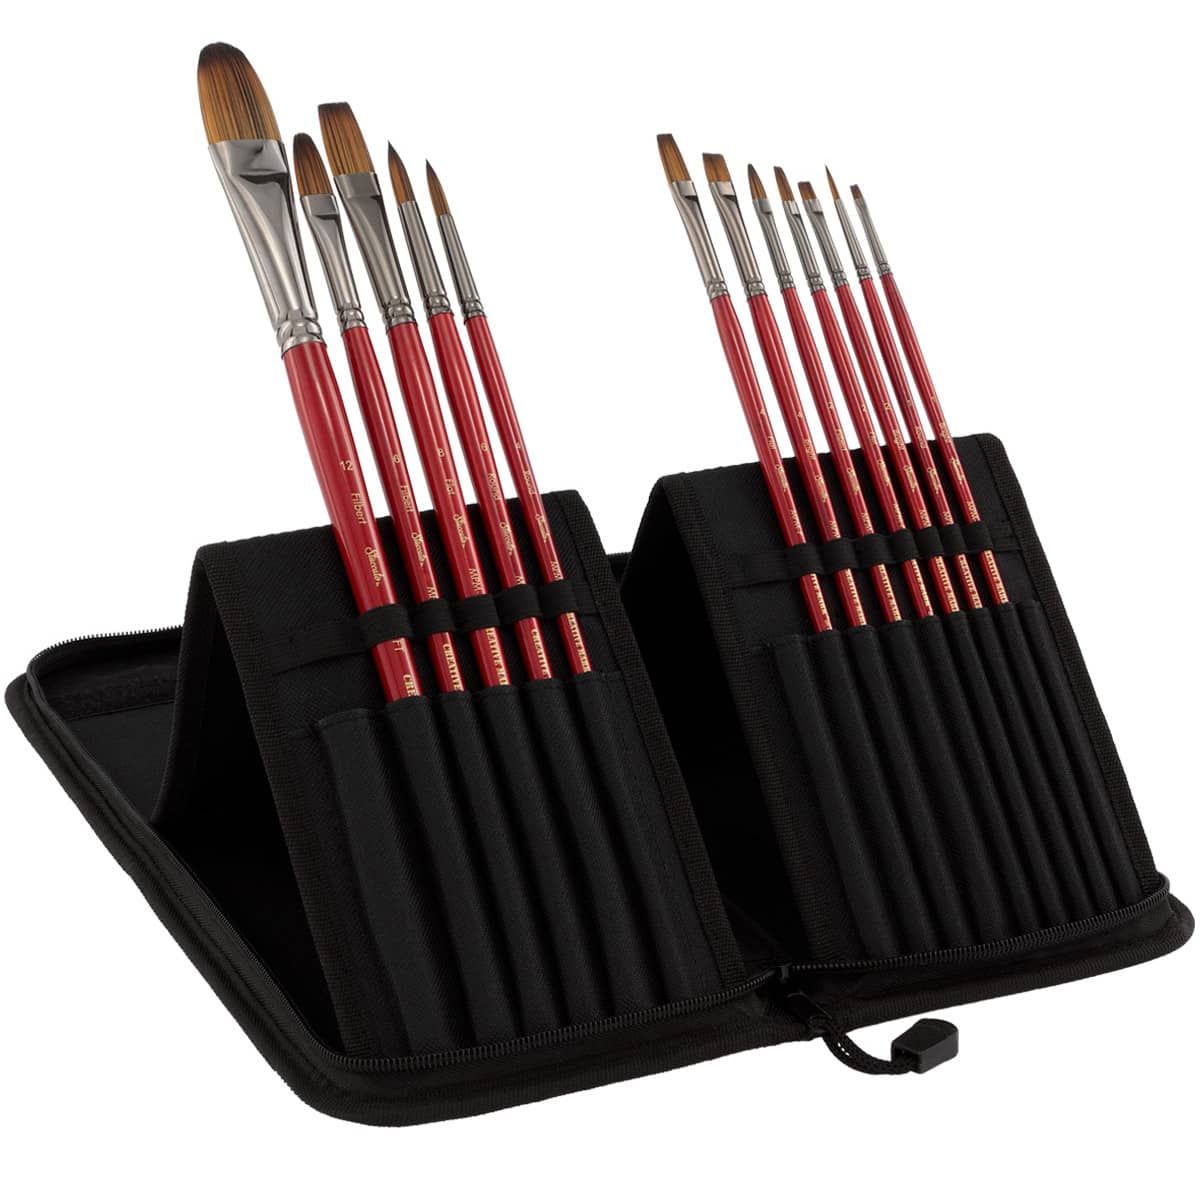 Creative Mark Staccato Artist Paintbrush Set of 12, Synthetic Bristle, Long Handled for Acrylic Painting, Includes Brush Easel Stand, Other